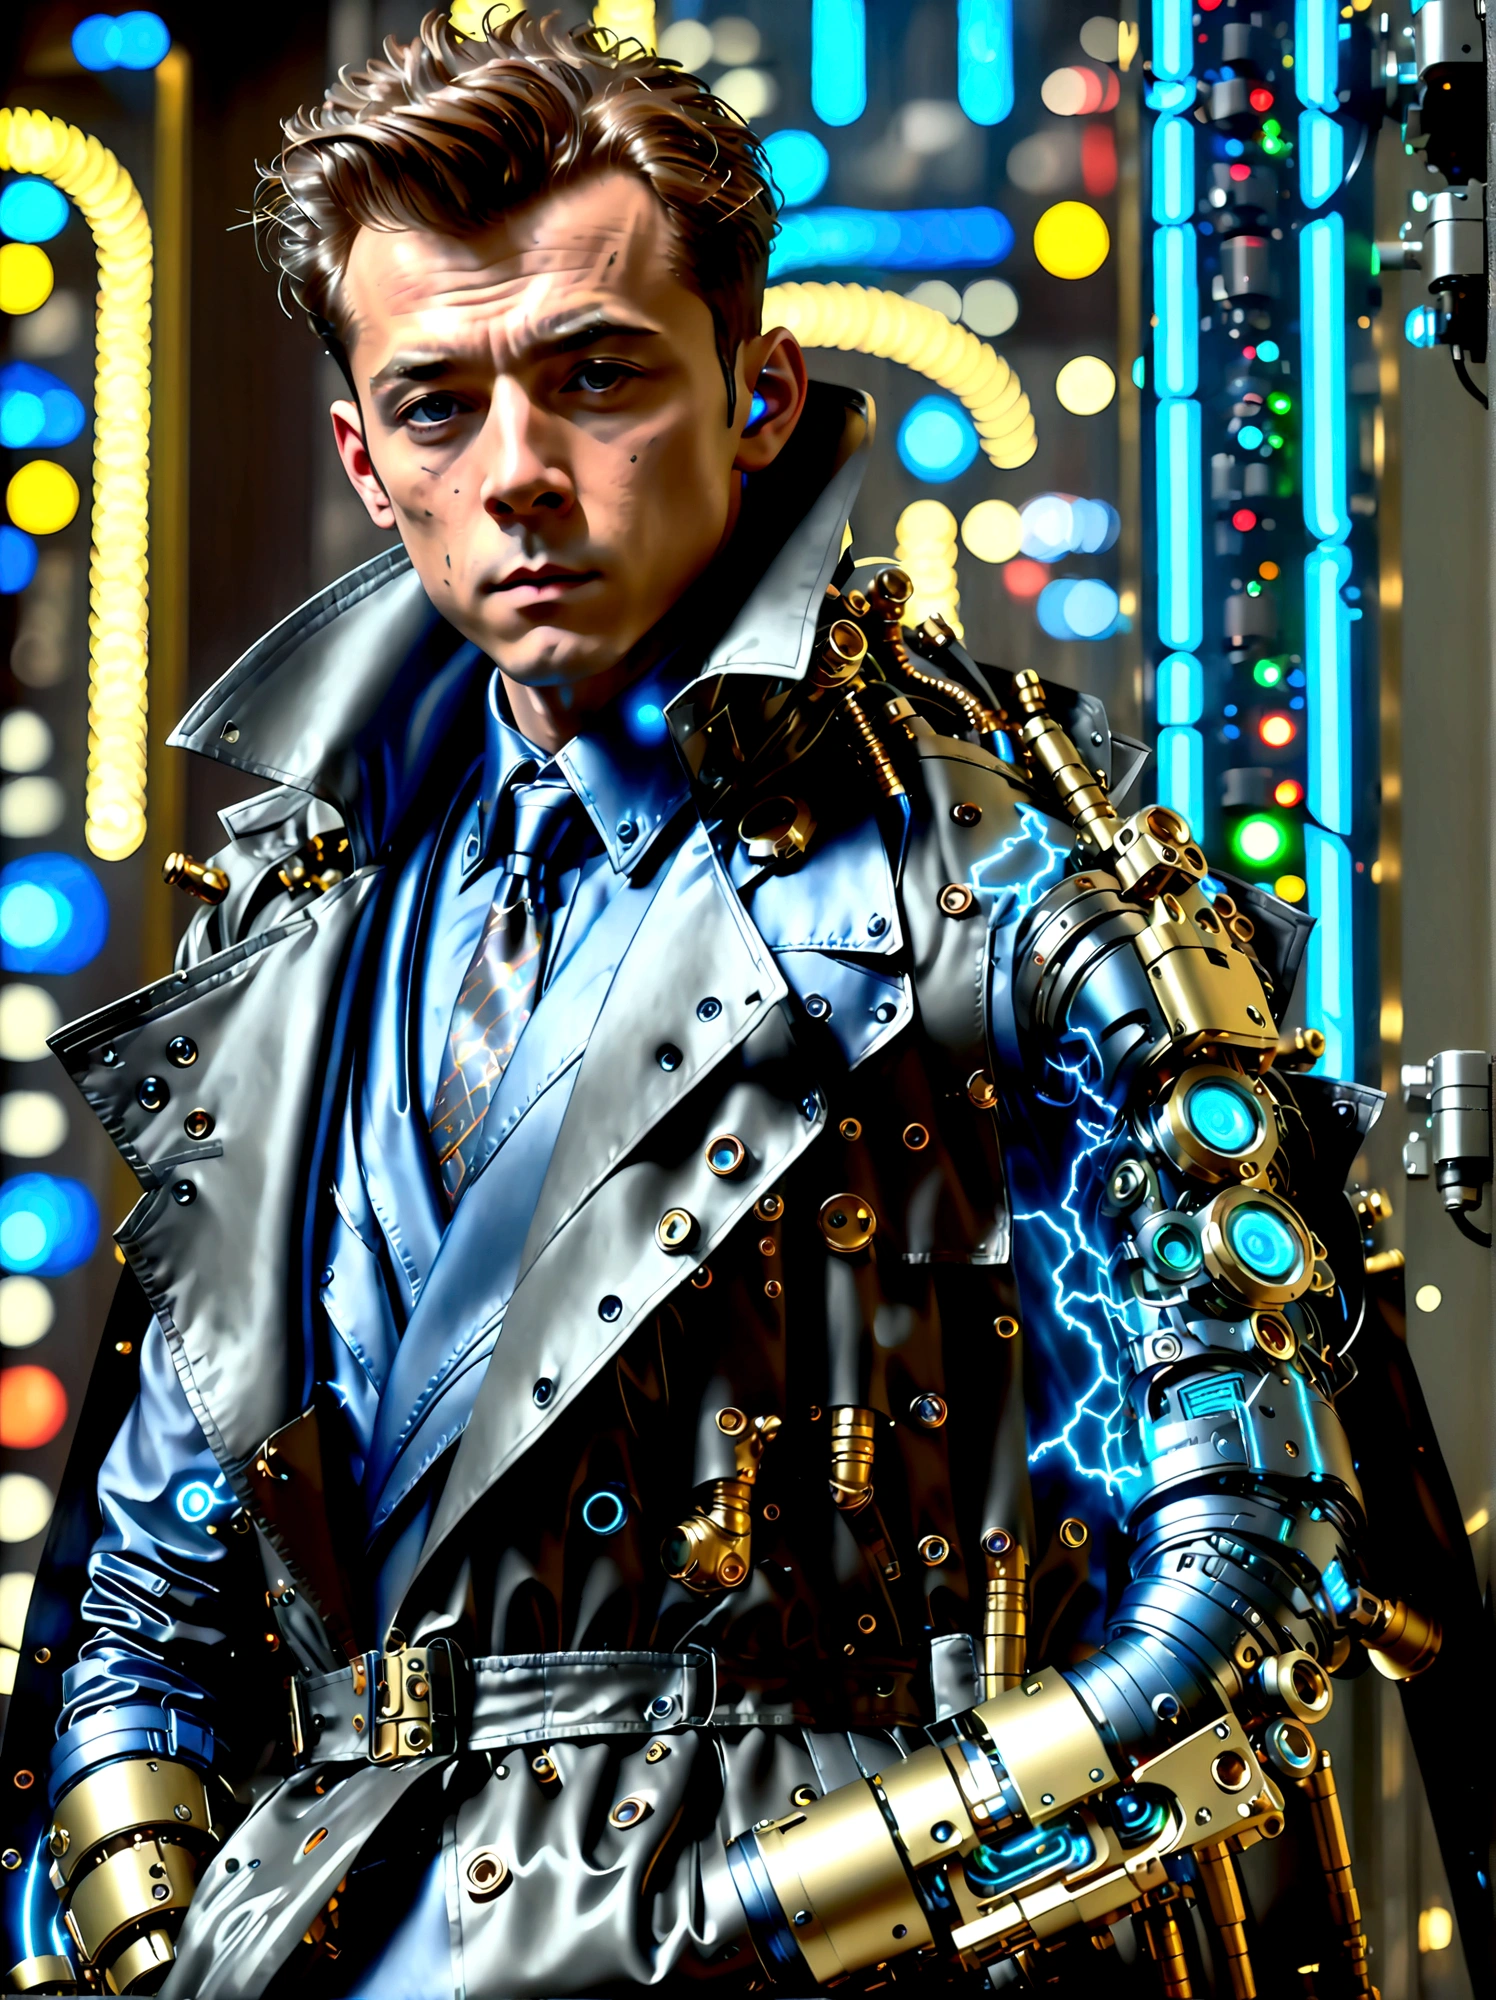 (best quality, 8k,highres,masterpiece:1.2), ultra-detailed, (realistic, photorealistic), (Detective Gadget in a sleek black trench coat:1.5), (Black trench coat of future technology:1.7), standing confidently, showcasing advanced futuristic gadgets, electric blue accents on his gadgets, mechanical arms extending from his coat, sharp and determined eyes, futuristic cityscape in background, bokeh, studio lighting, sharp focus